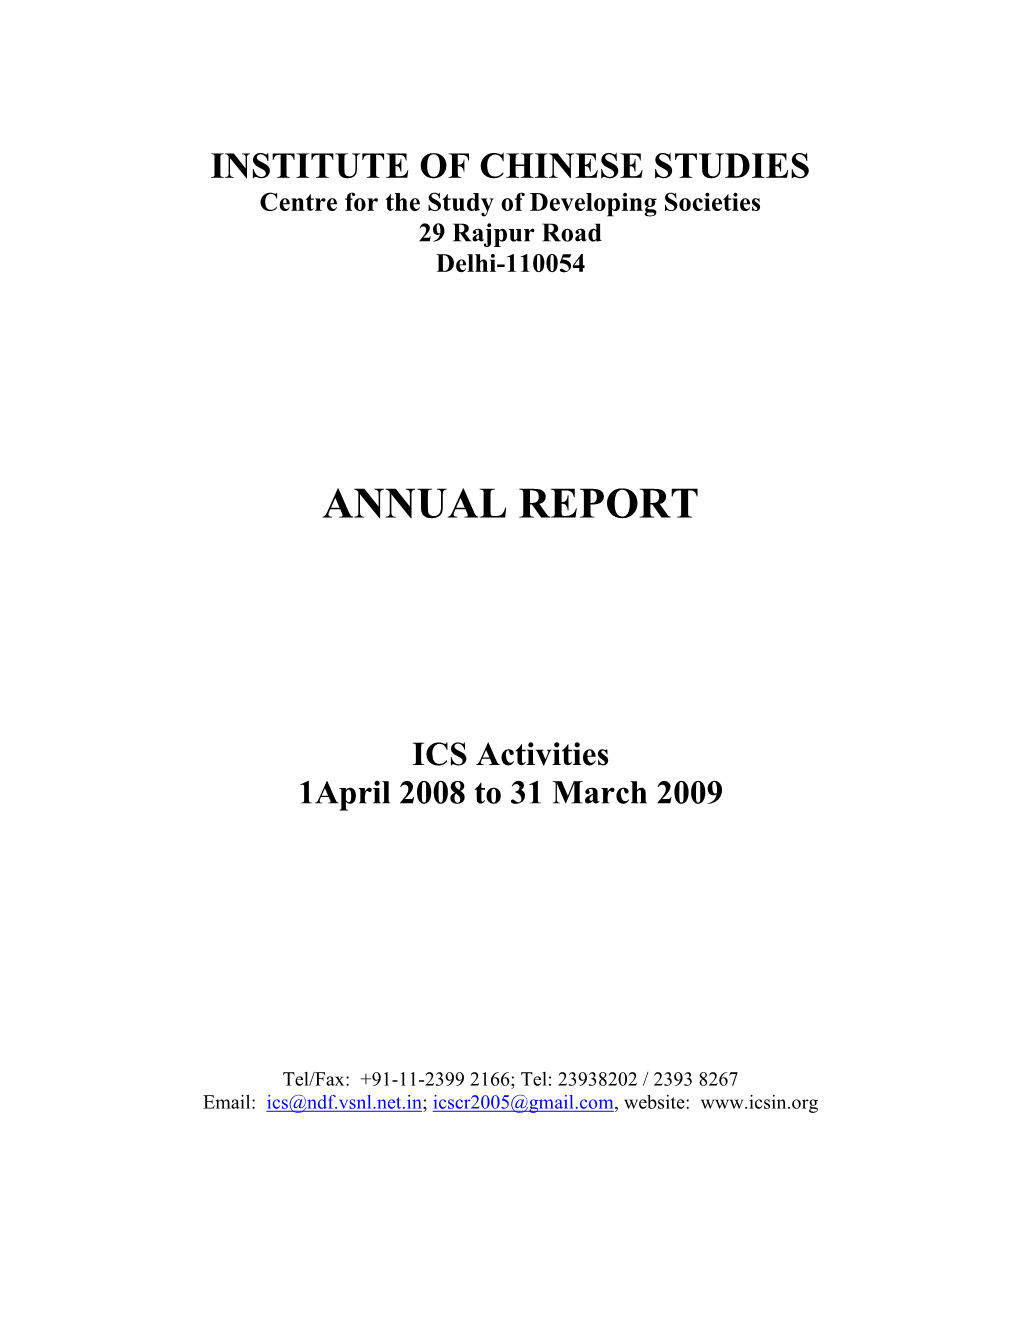 INSTITUTE of CHINESE STUDIES Centre for the Study of Developing Societies 29 Rajpur Road Delhi-110054 ANNUAL REPORT ICS Activities 1April 2008 to 31 March 2009